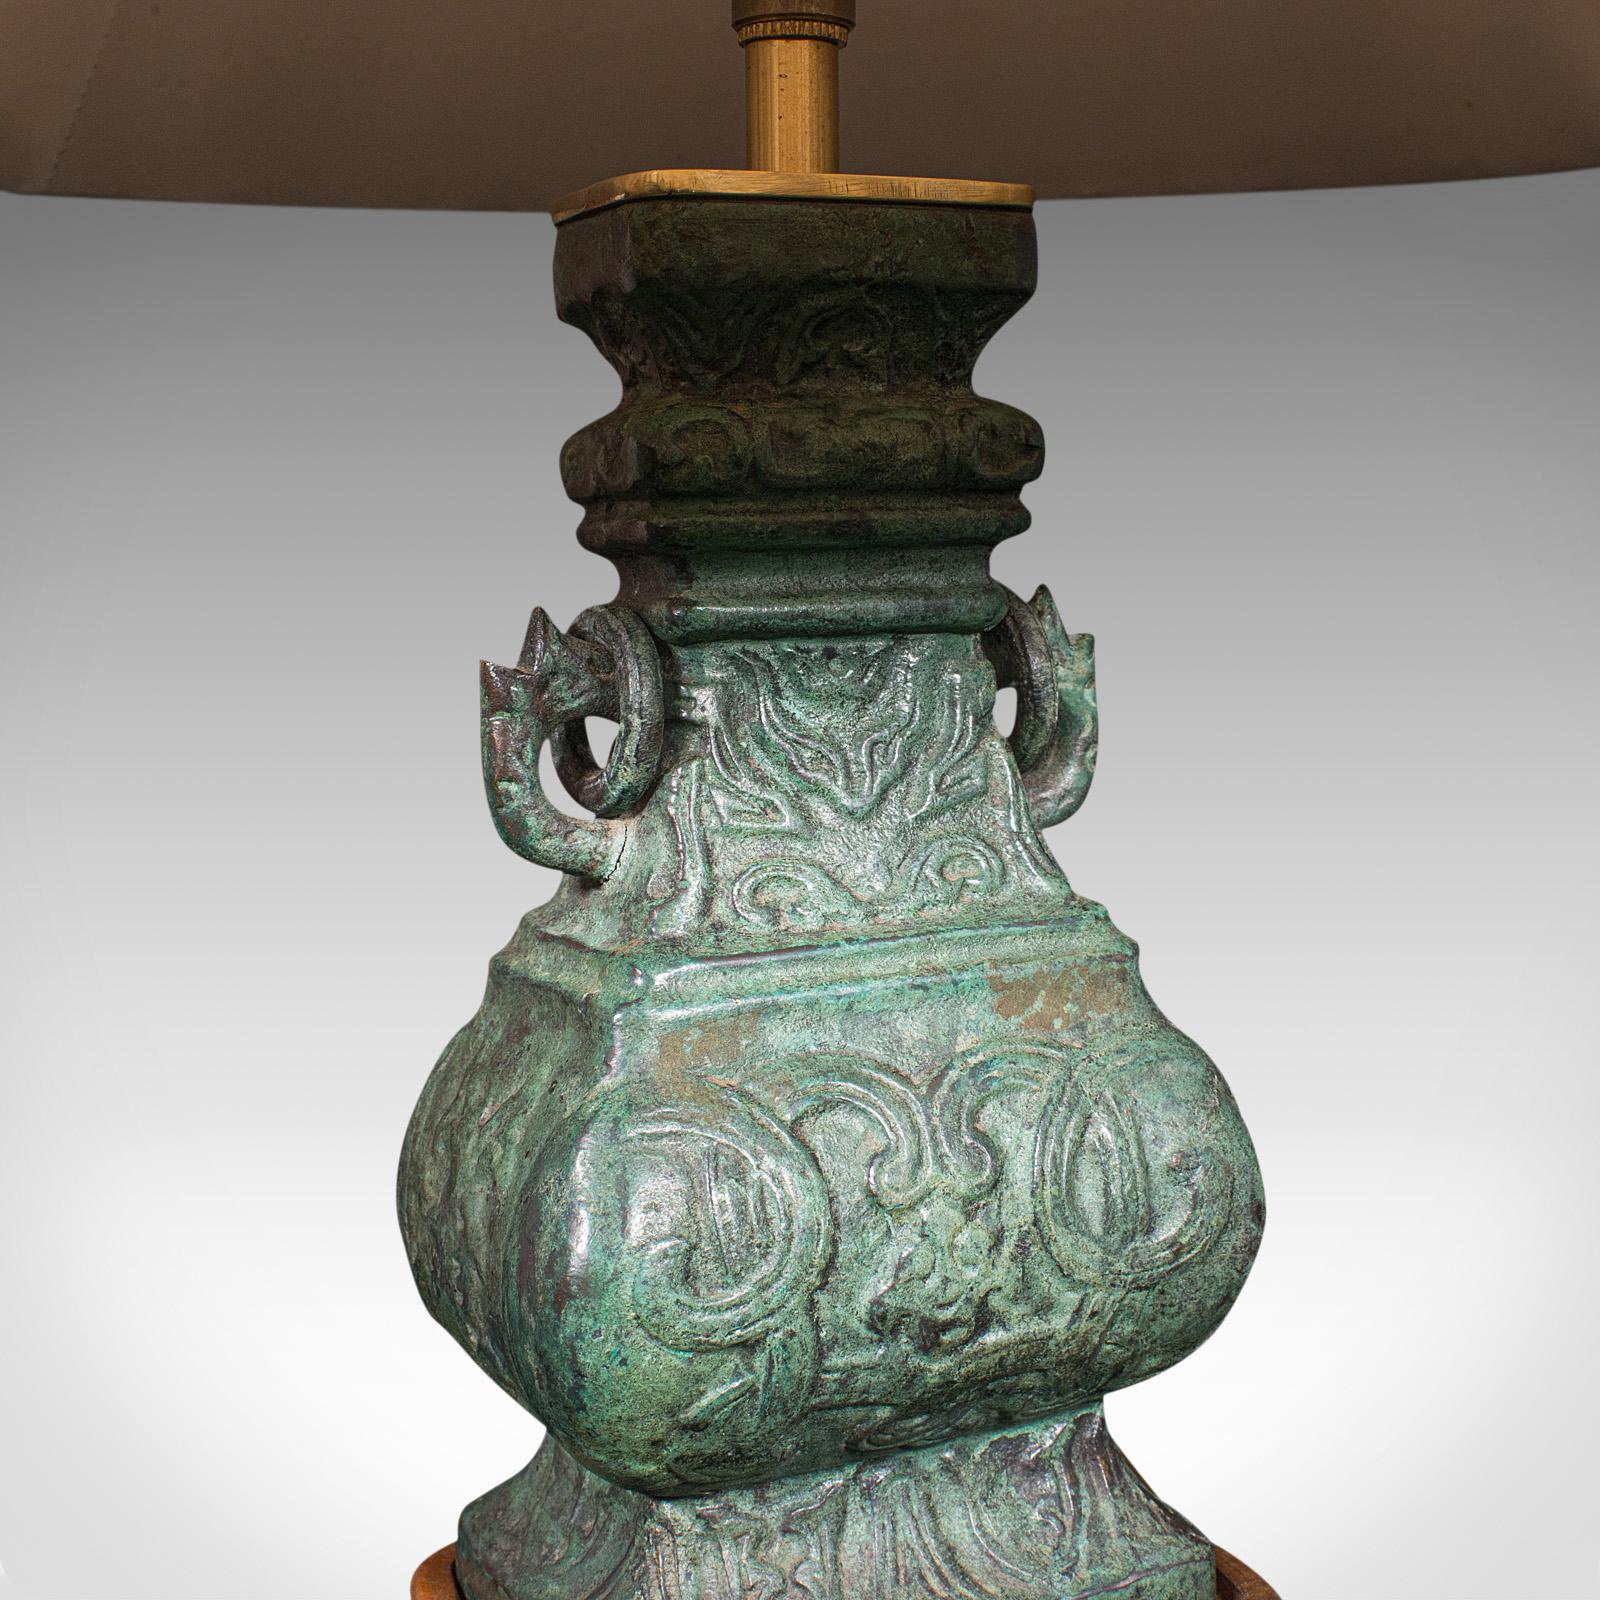 Vintage Decorative Table Lamp, Chinese, Bronze, Accent Light, Mid Century, 1960 4